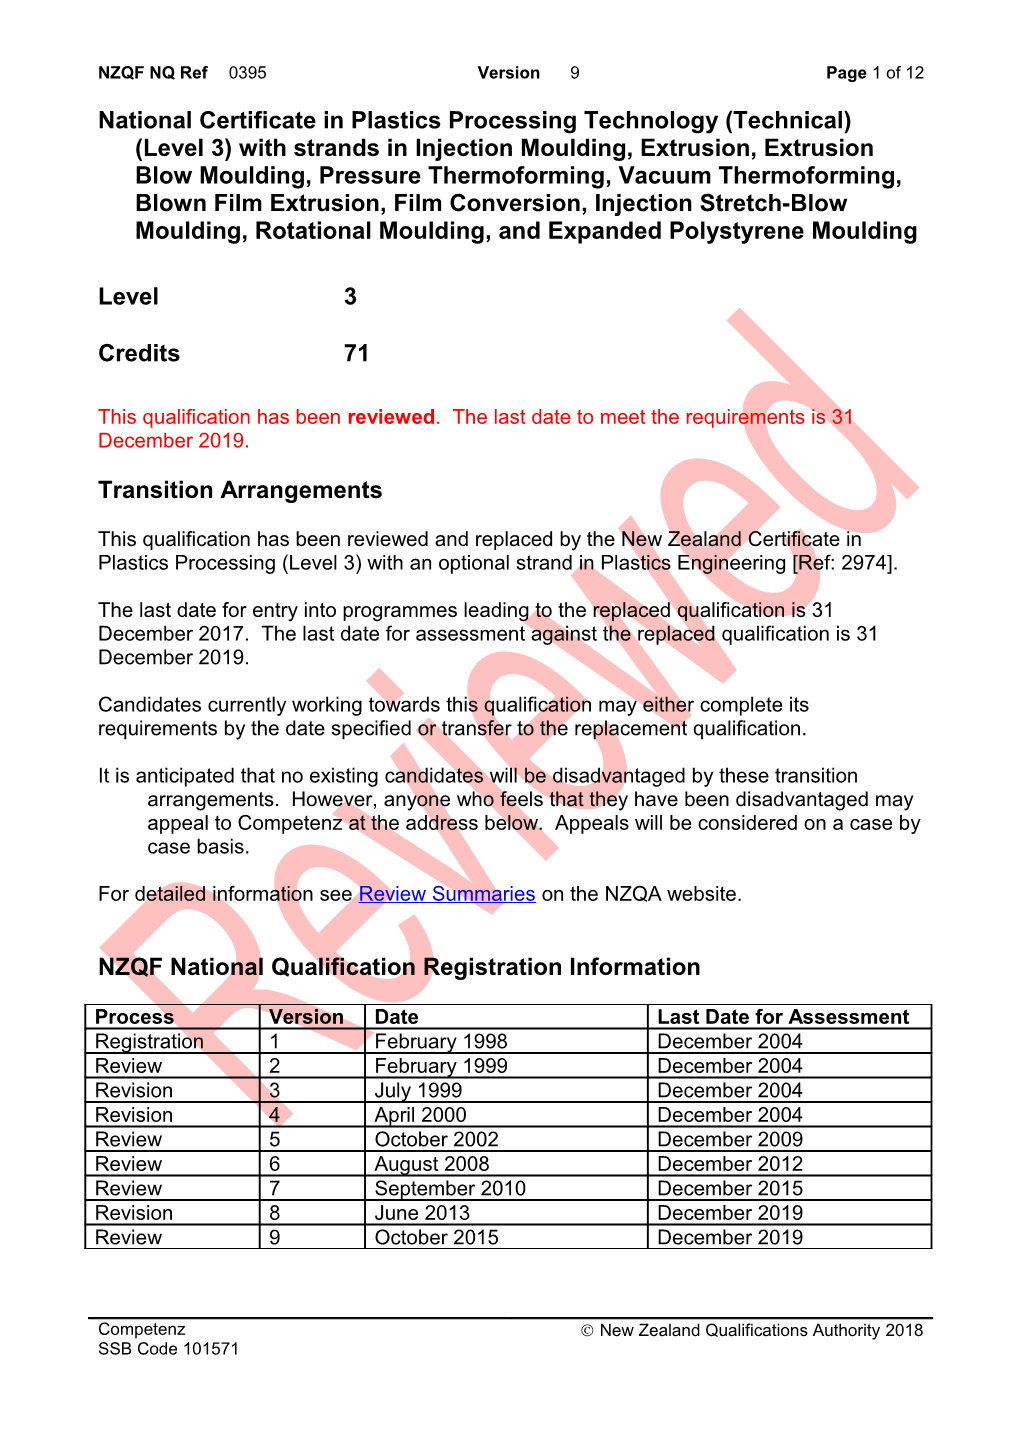 0395 National Certificate in Plastics Processing Technology (Technical) (Level 3) With